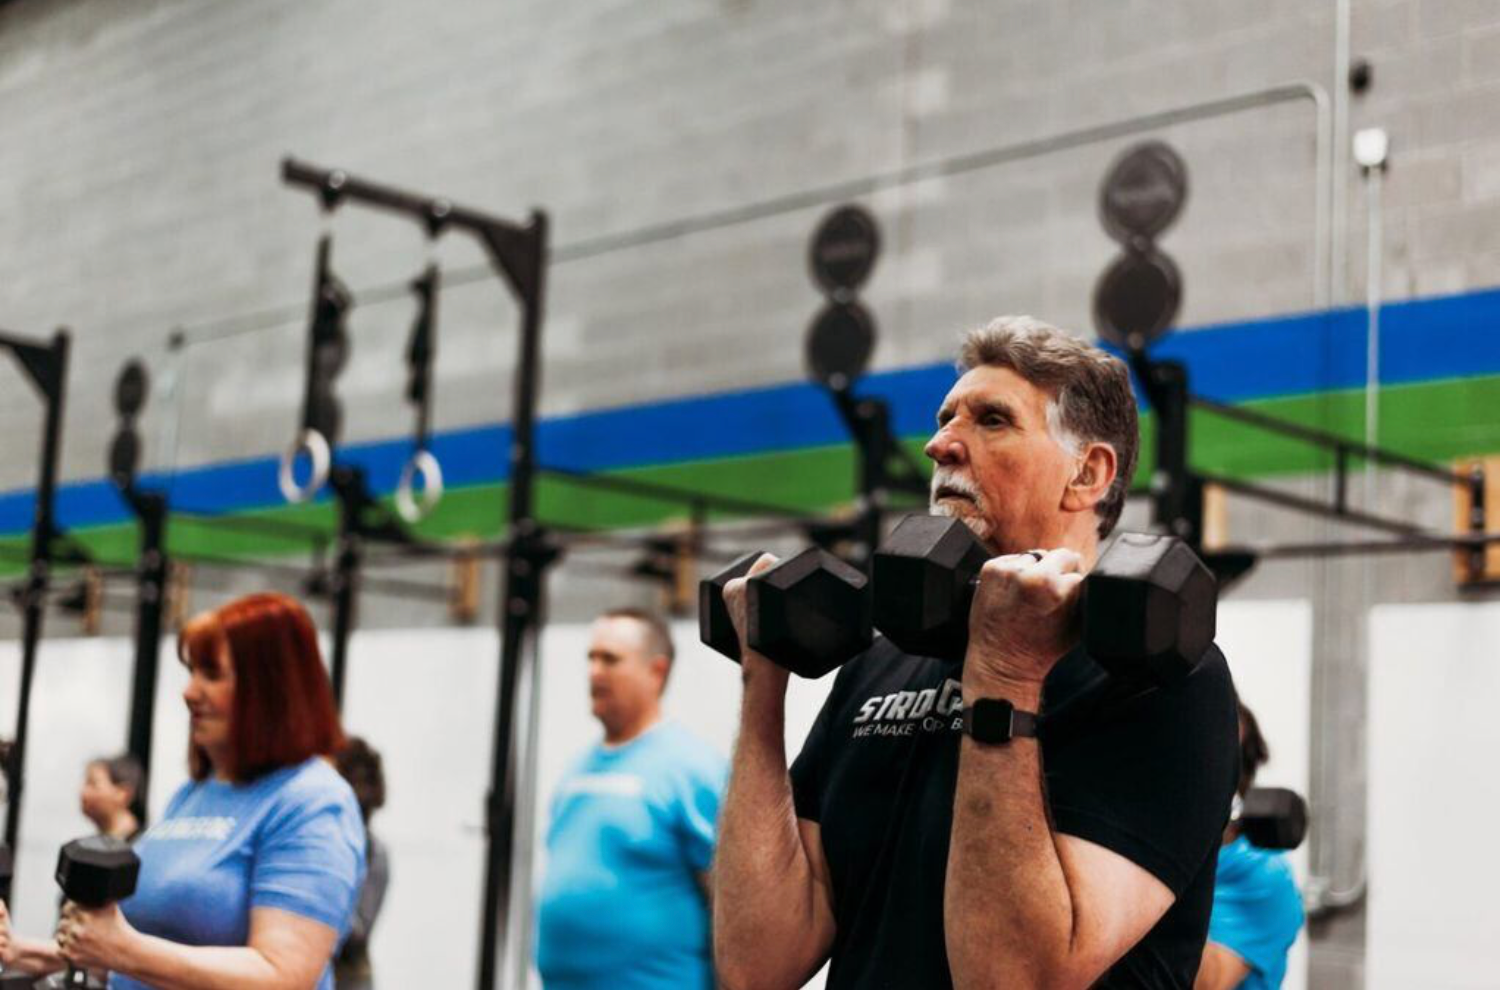 A man is lifting a dumbbell in a gym.